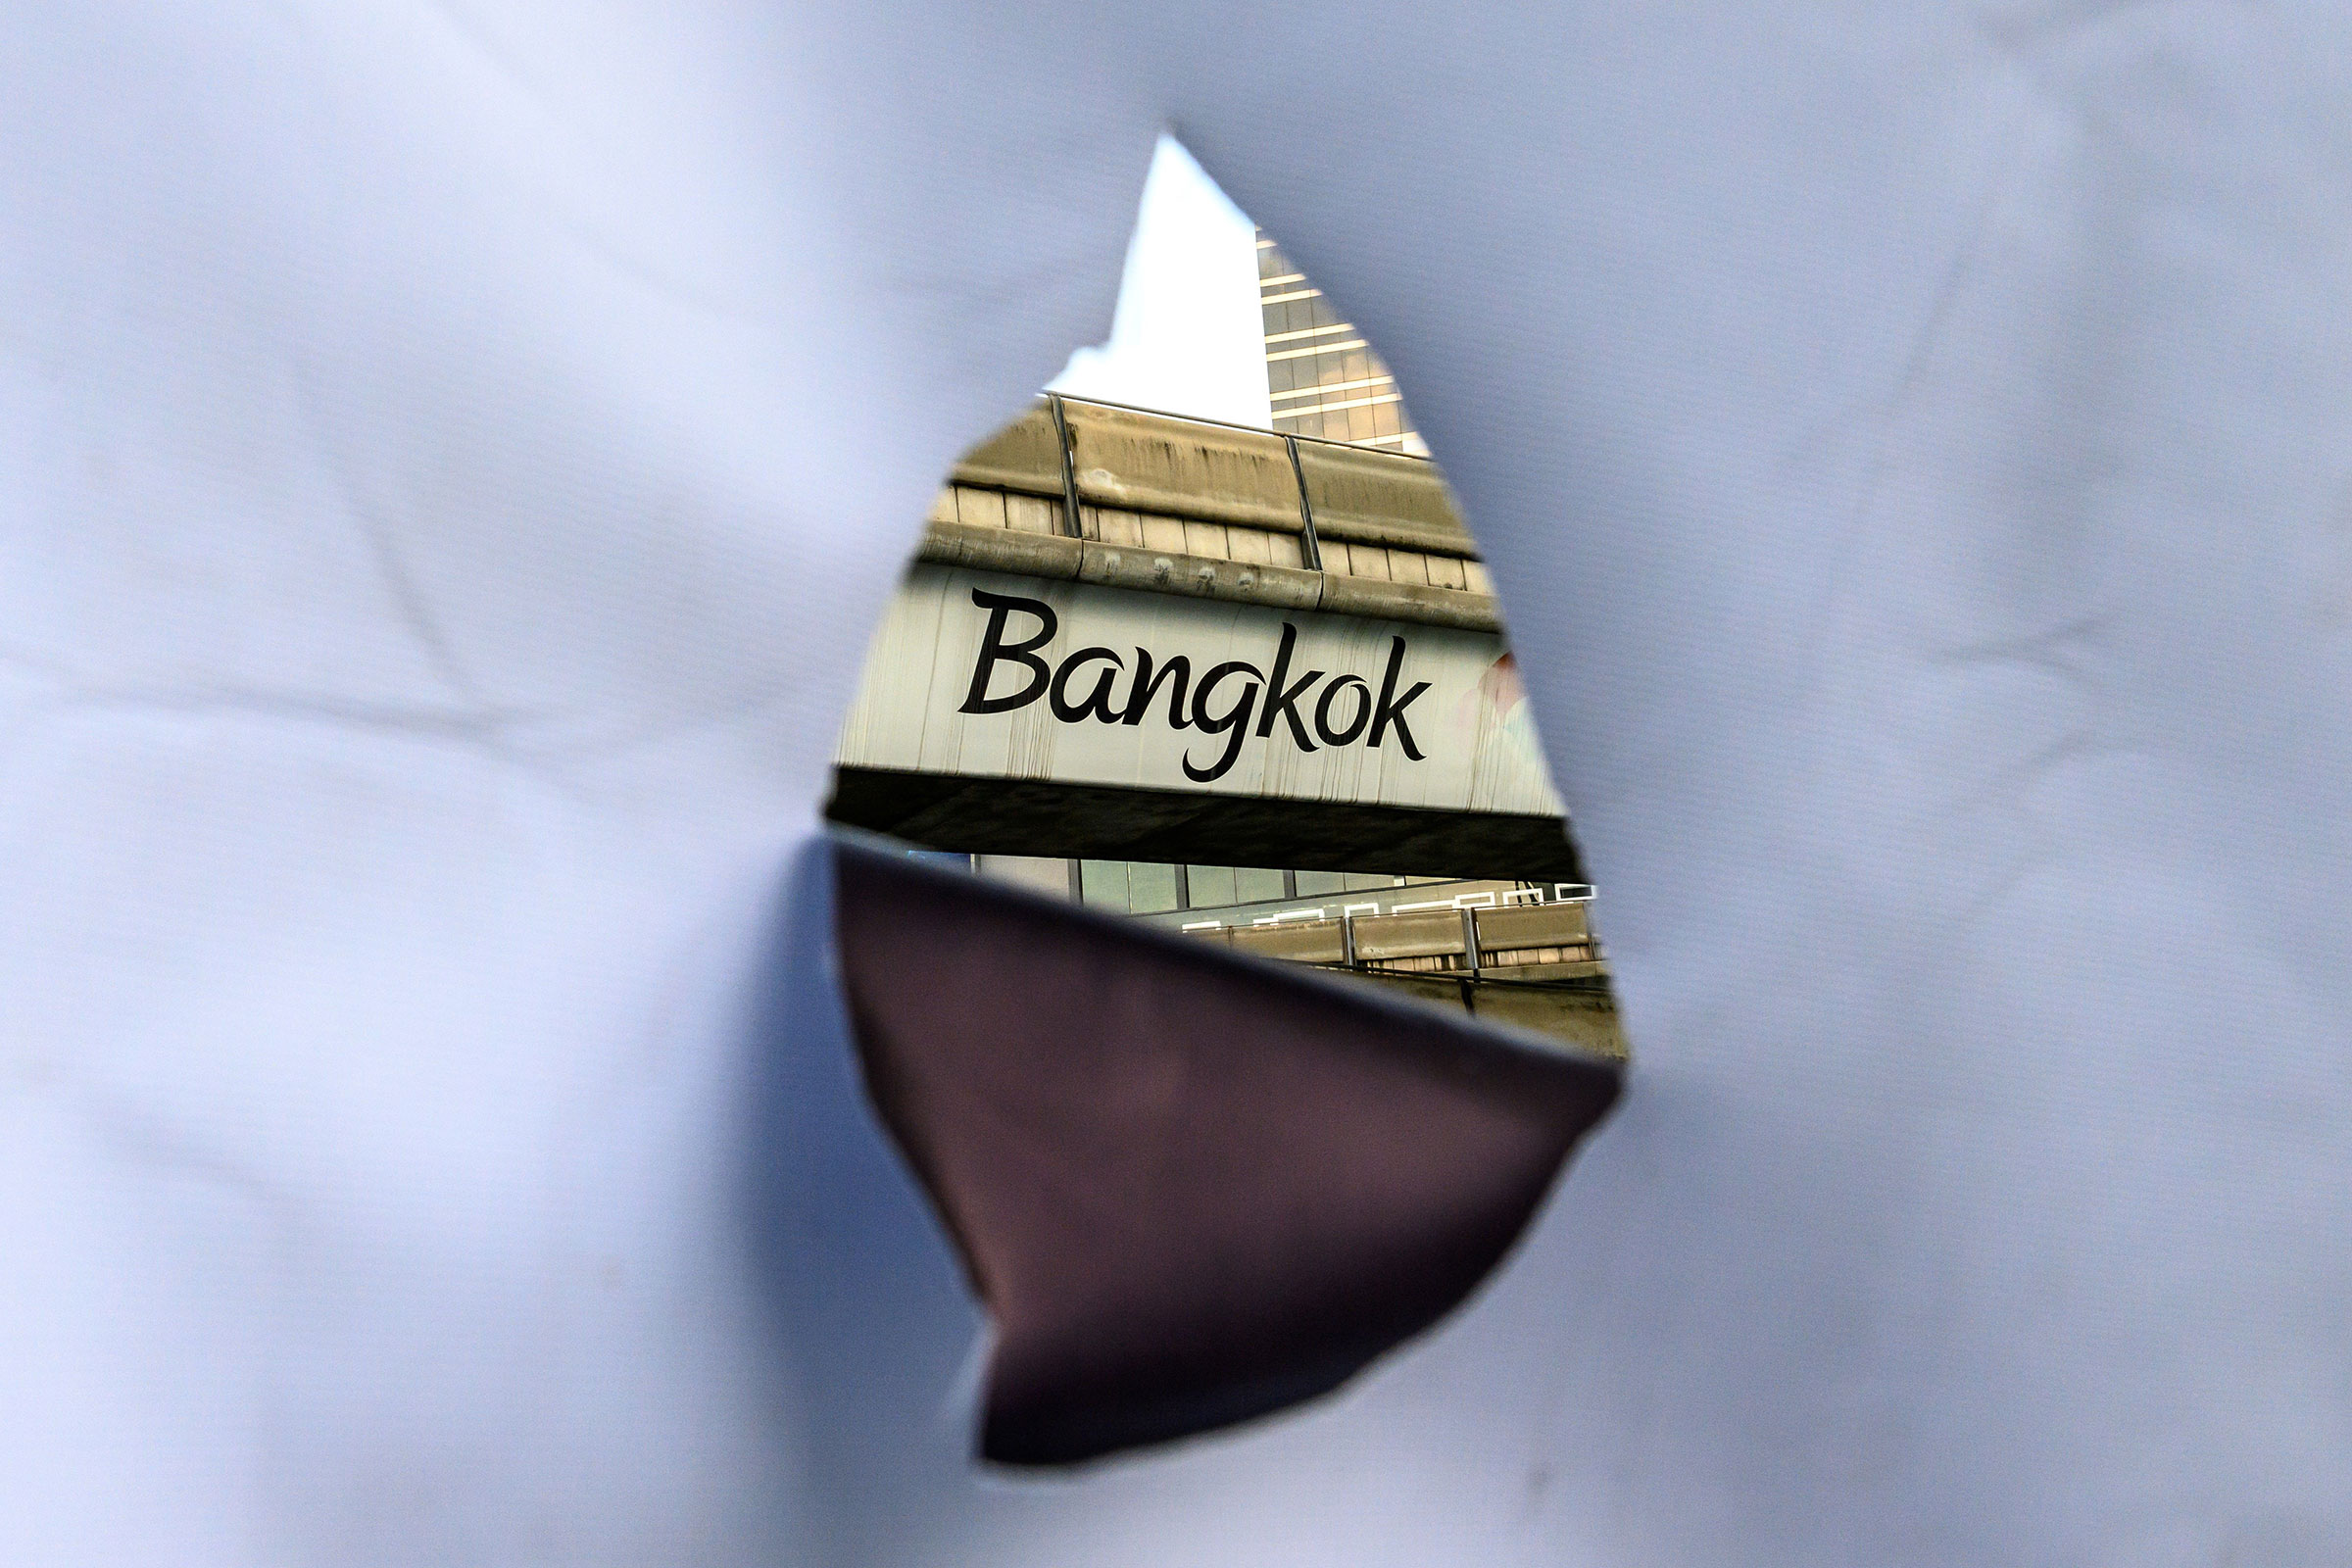 A Bangkok inscription on a sky train bridge is seen through the hole of a banner during a commemoration of the anniversary of the 1932 revolution which ended absolute monarchy with heavily symbolic events in Bangkok on June 24, 2020, demanding reforms to a political system dominated by the arch-royalist army. (Mladen Antonov—AFP/Getty Images)